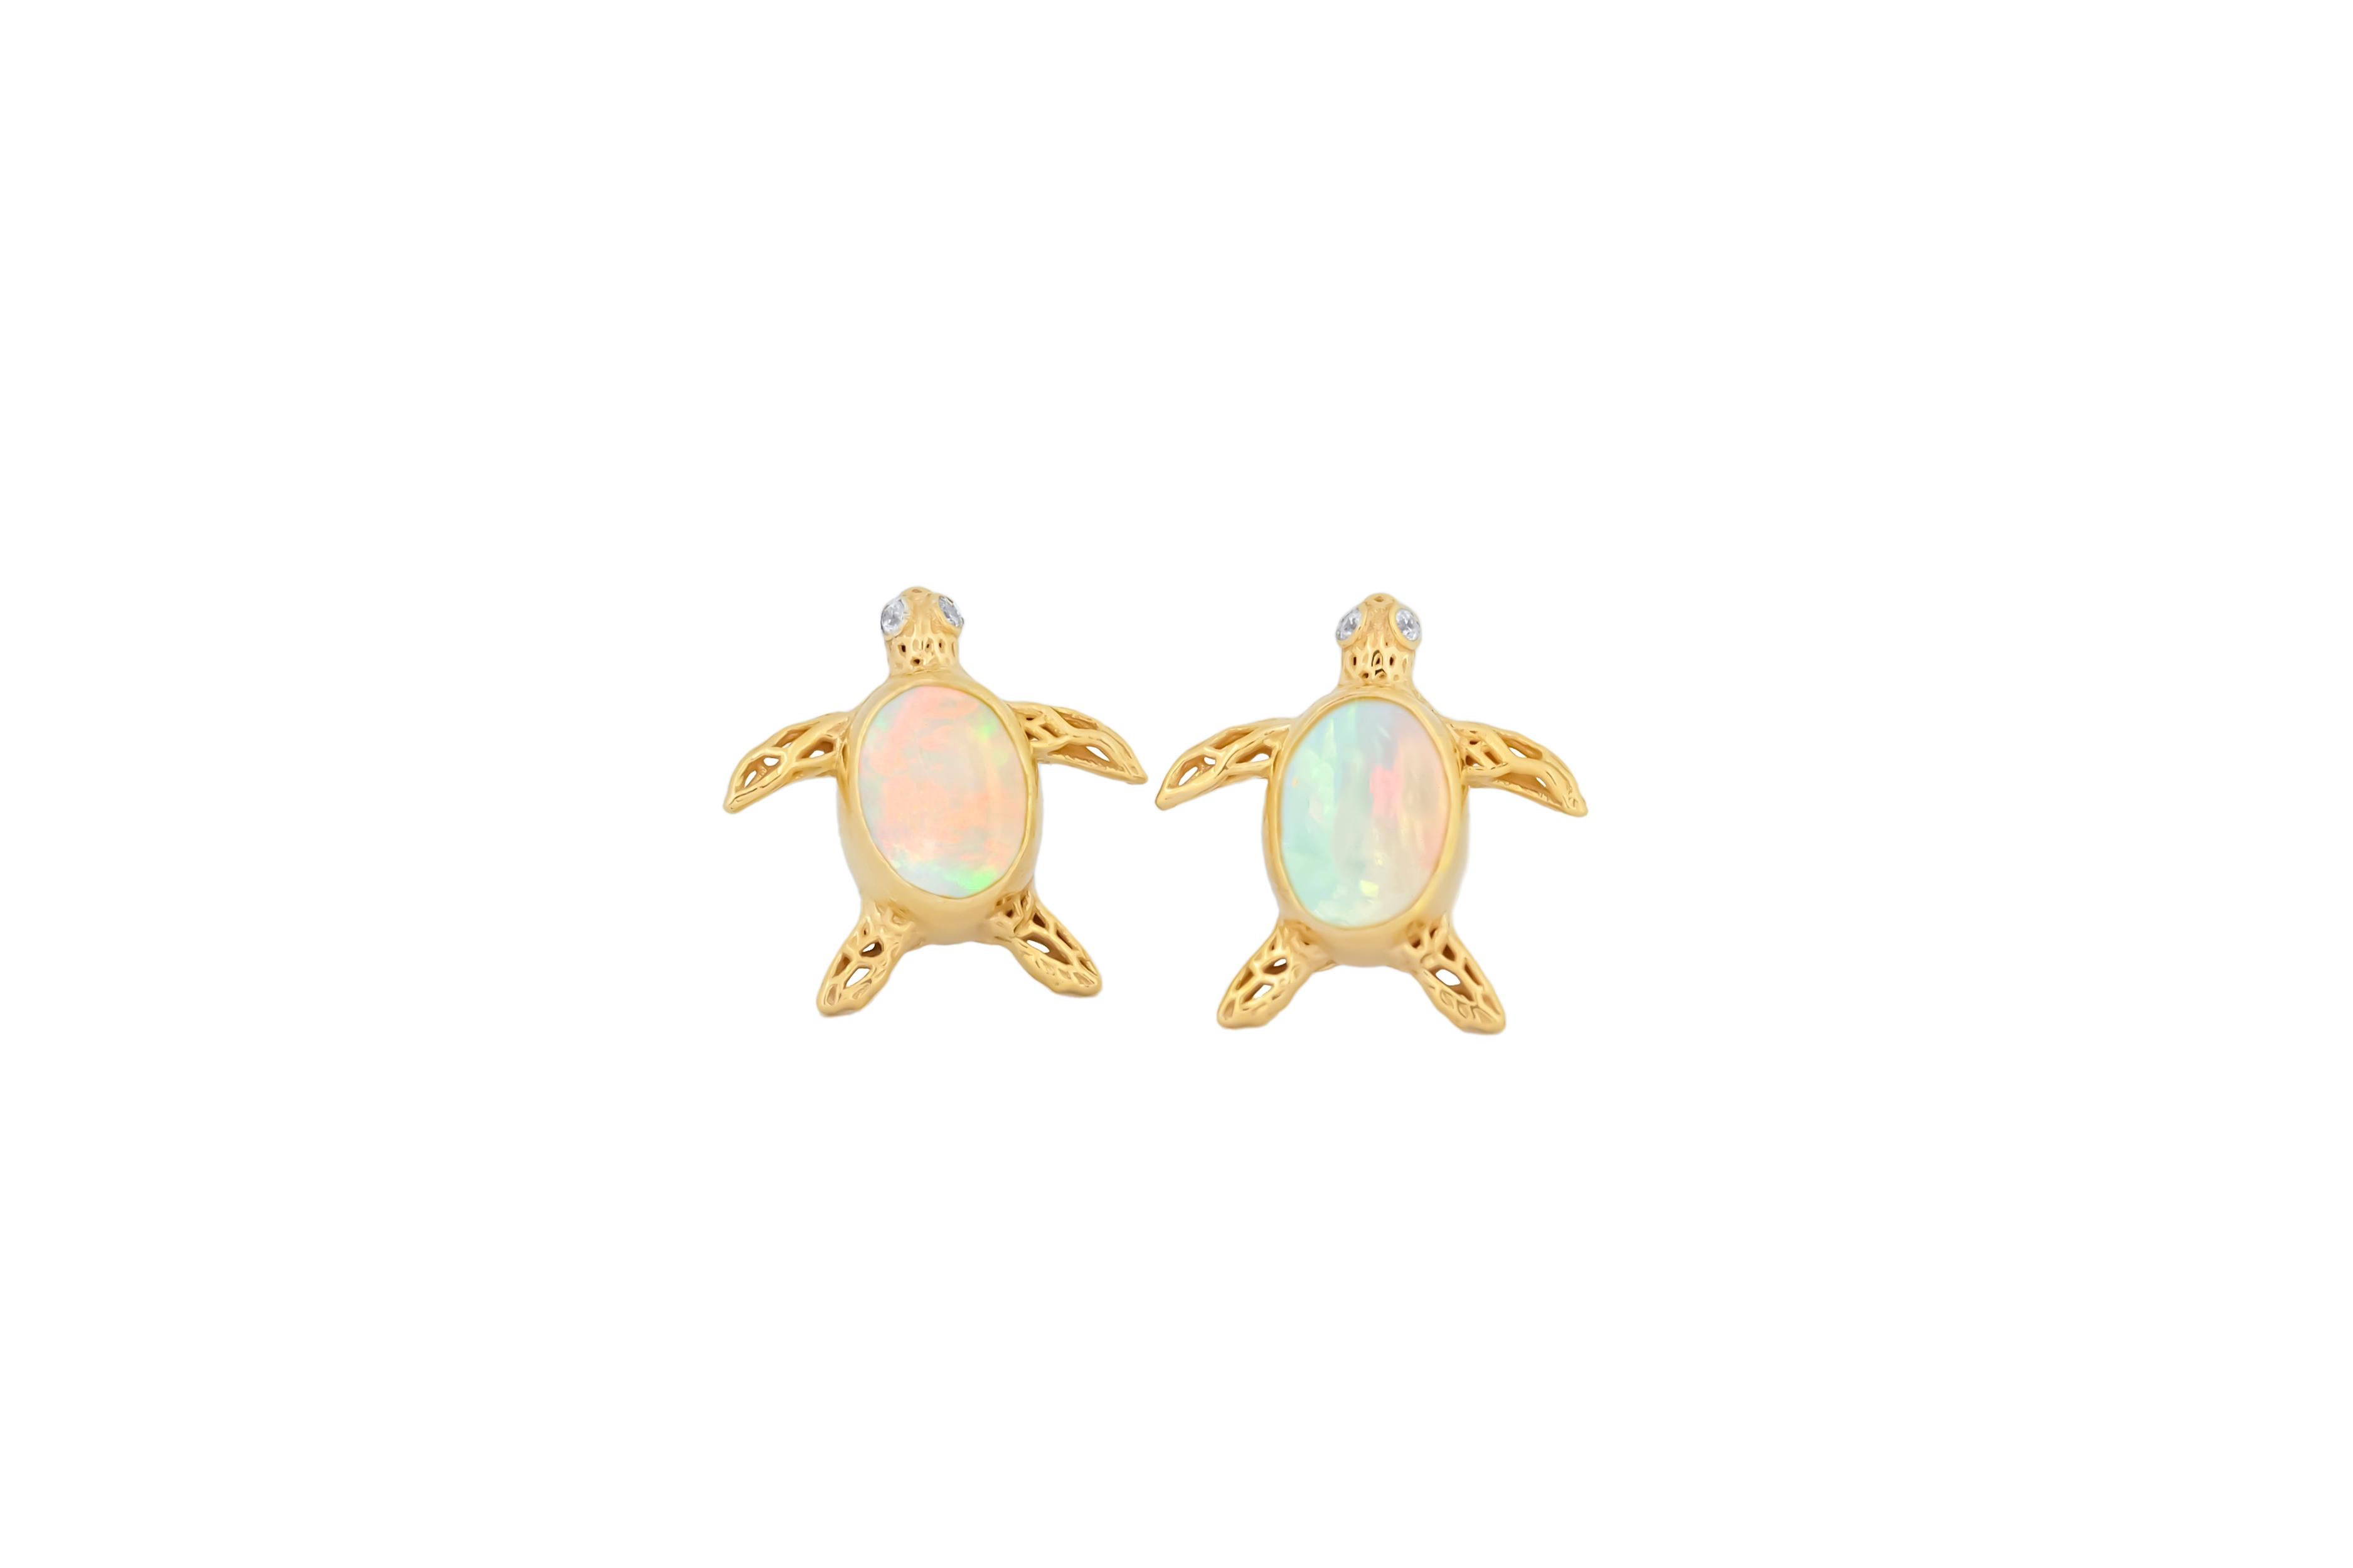 Cabochon Turtle earrings studs with opals in 14k gold. For Sale